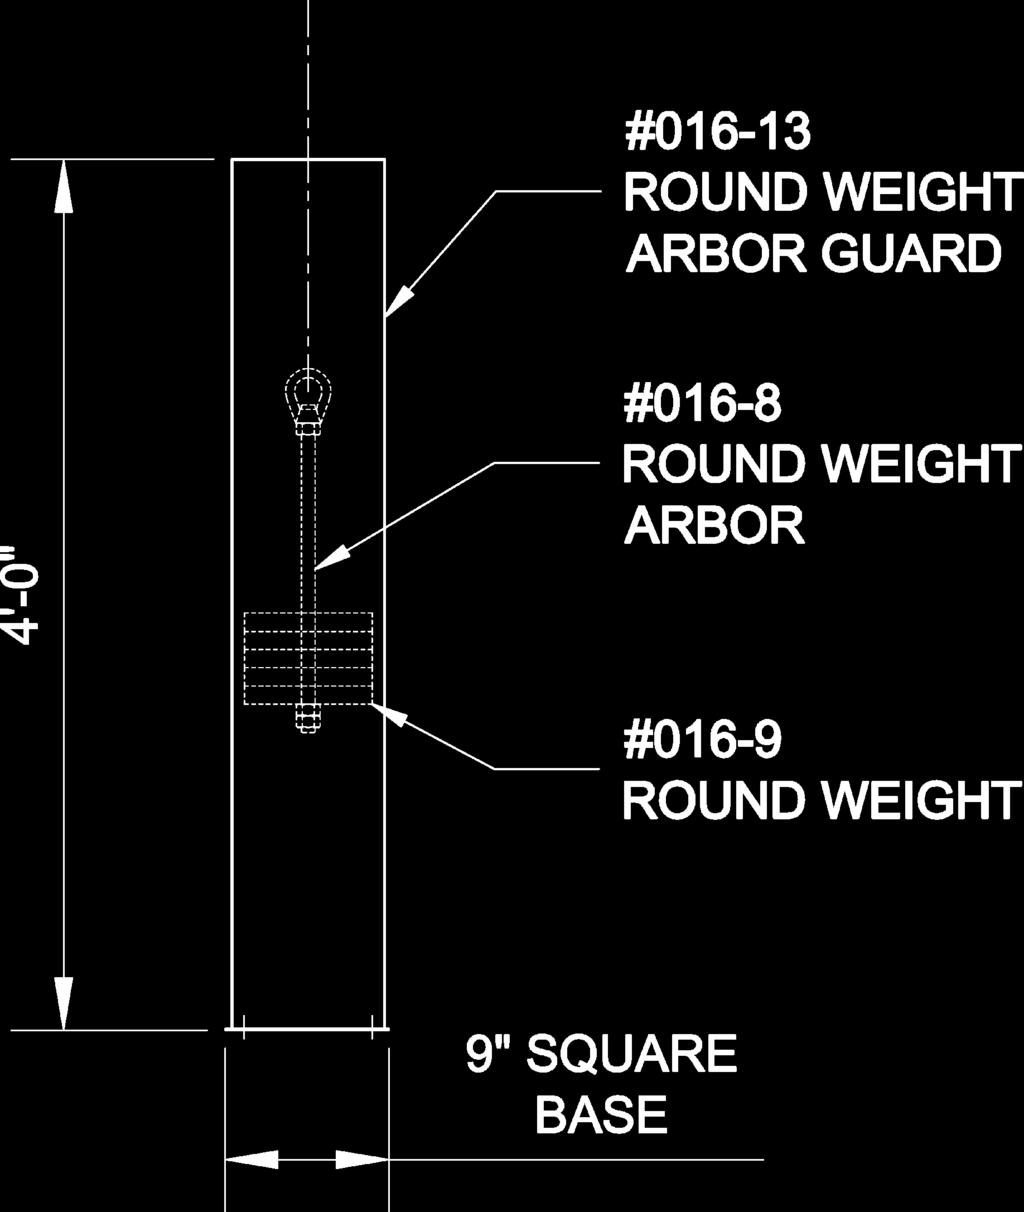 7 kg 016-13 Round Weight Arbor Guard 15 lbs. 6.